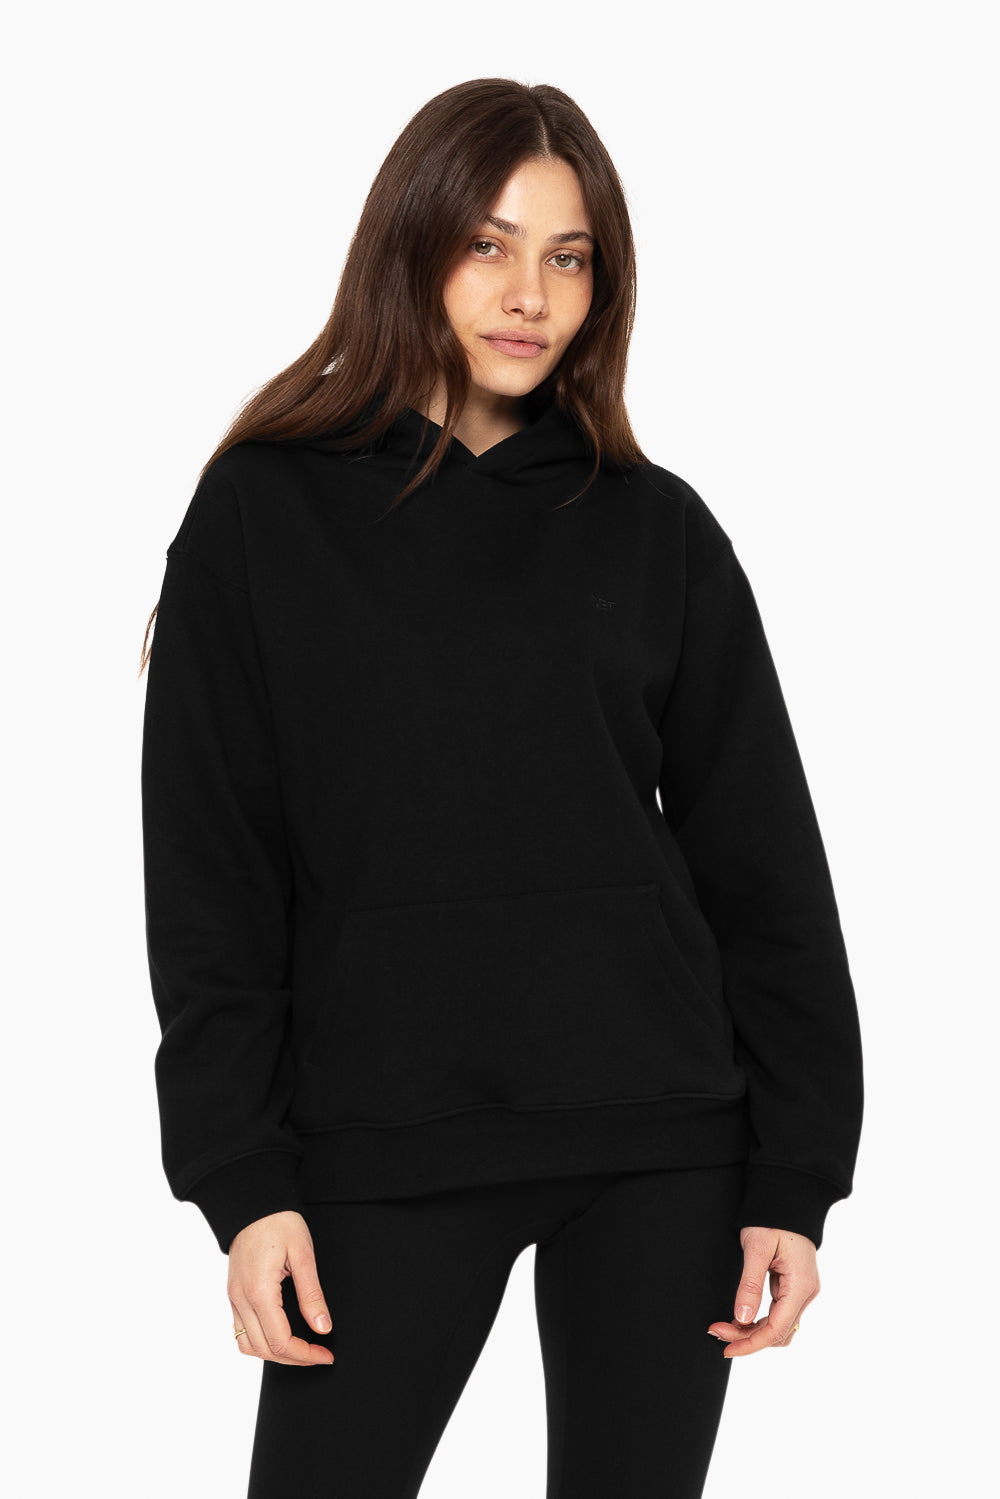 SET™ EMBROIDERED HEAVYWEIGHT SWEATS HOODIE IN ONYX